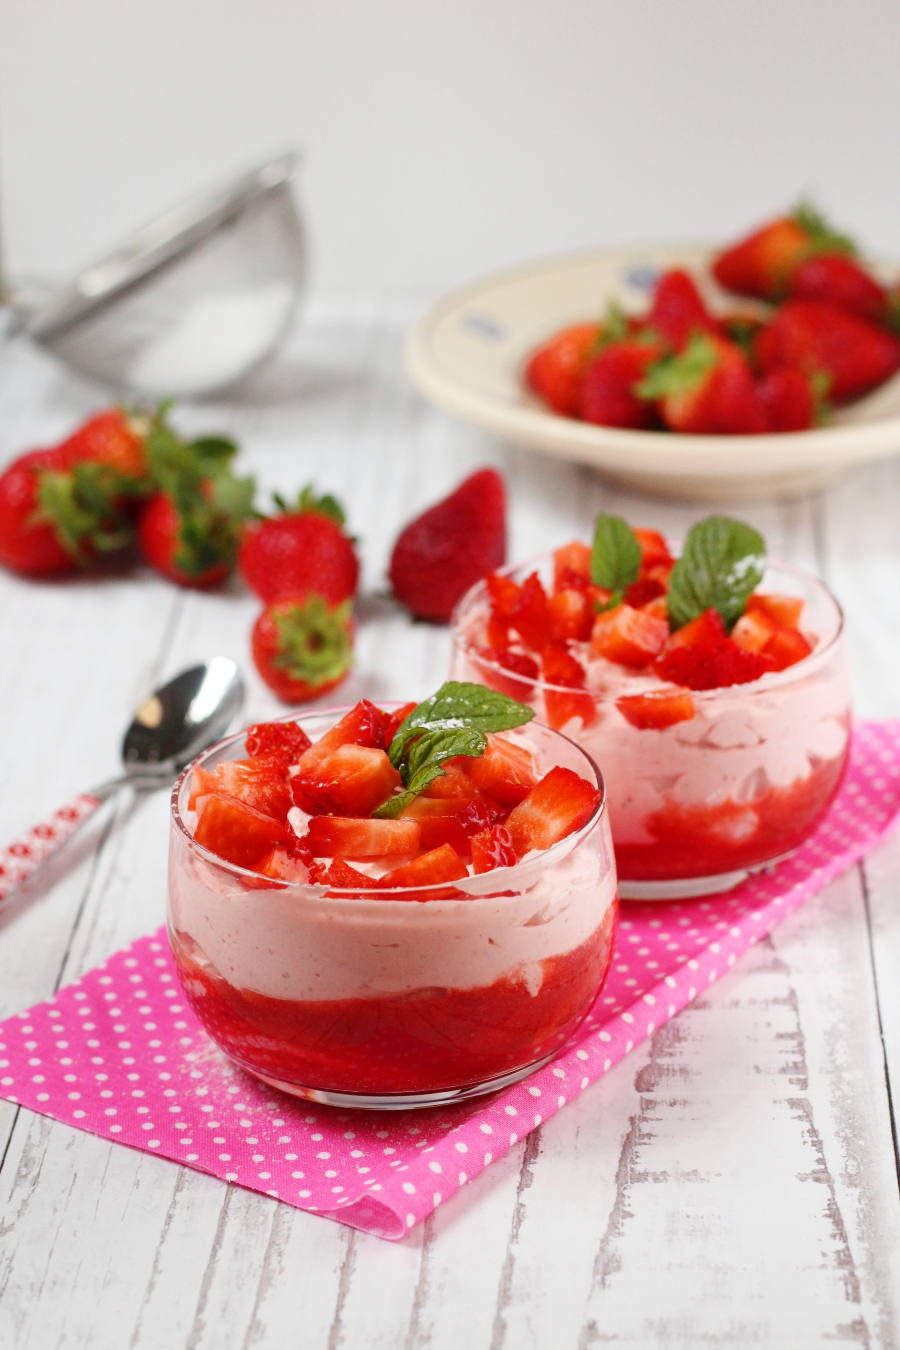 Mousse alle fragole ricetta